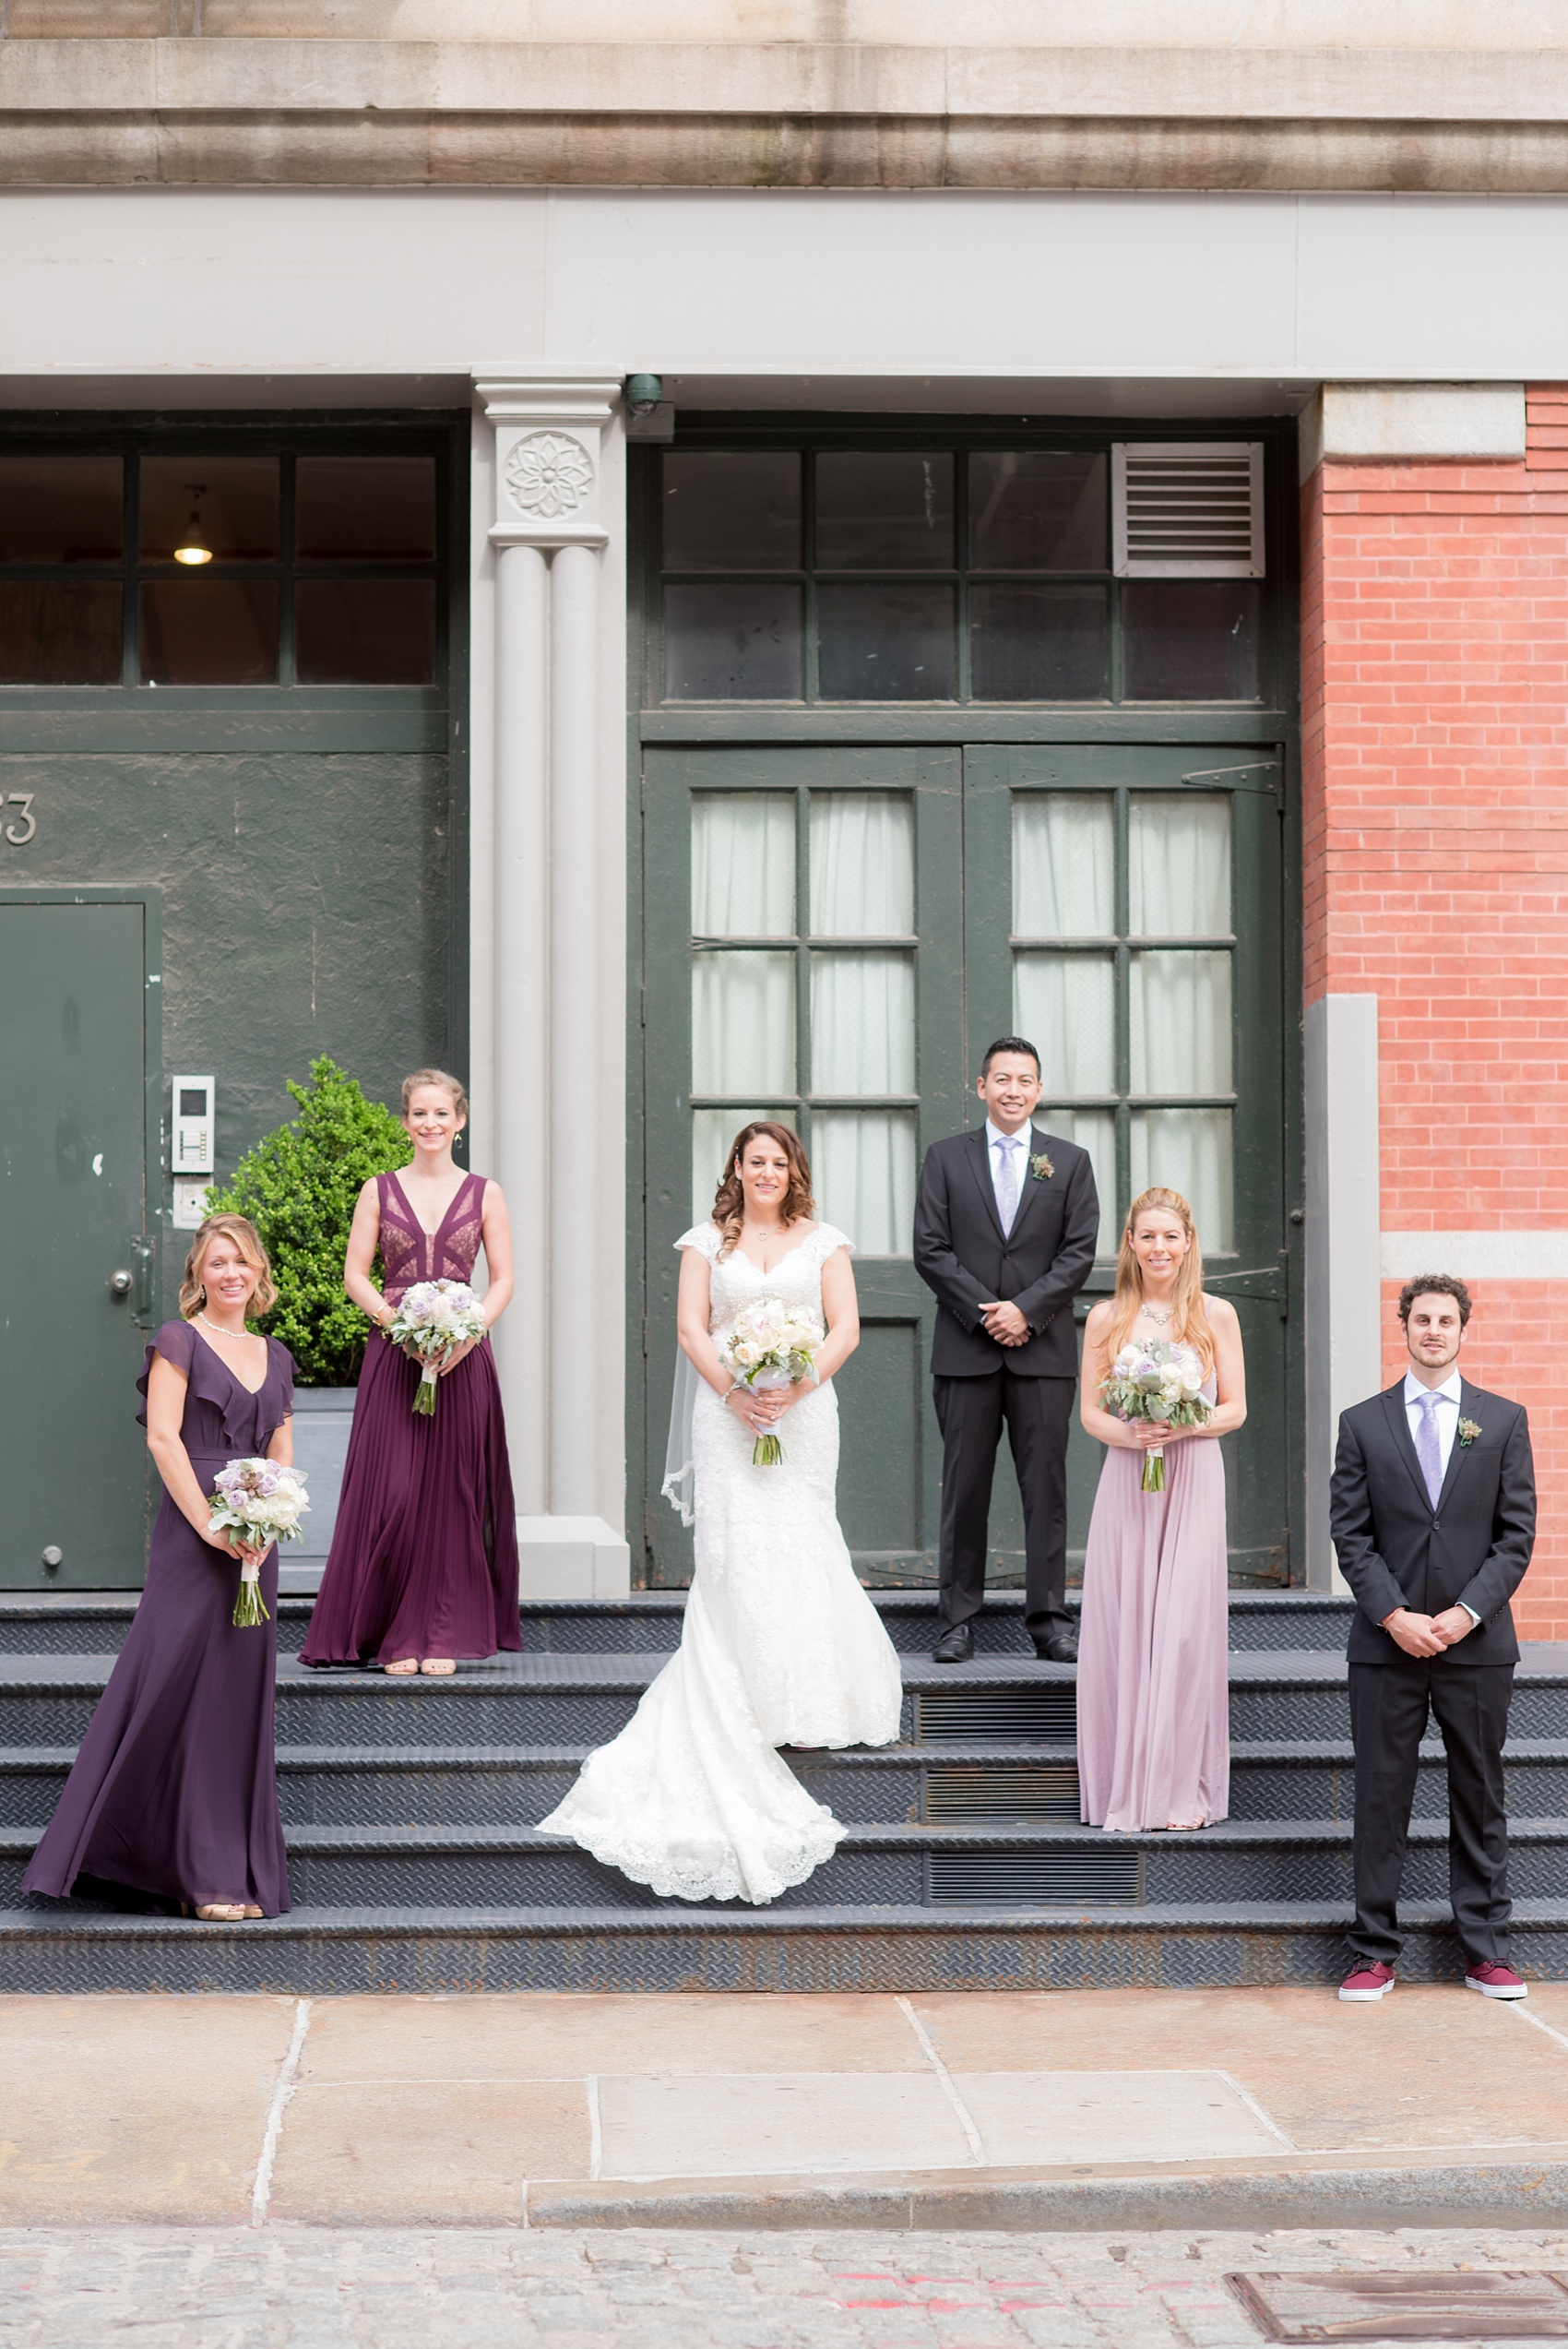 Mikkel Paige Photography photos of a NYC wedding at Tribeca Rooftop. An urban image of the wedding party in shades of mismatched purple dresses.